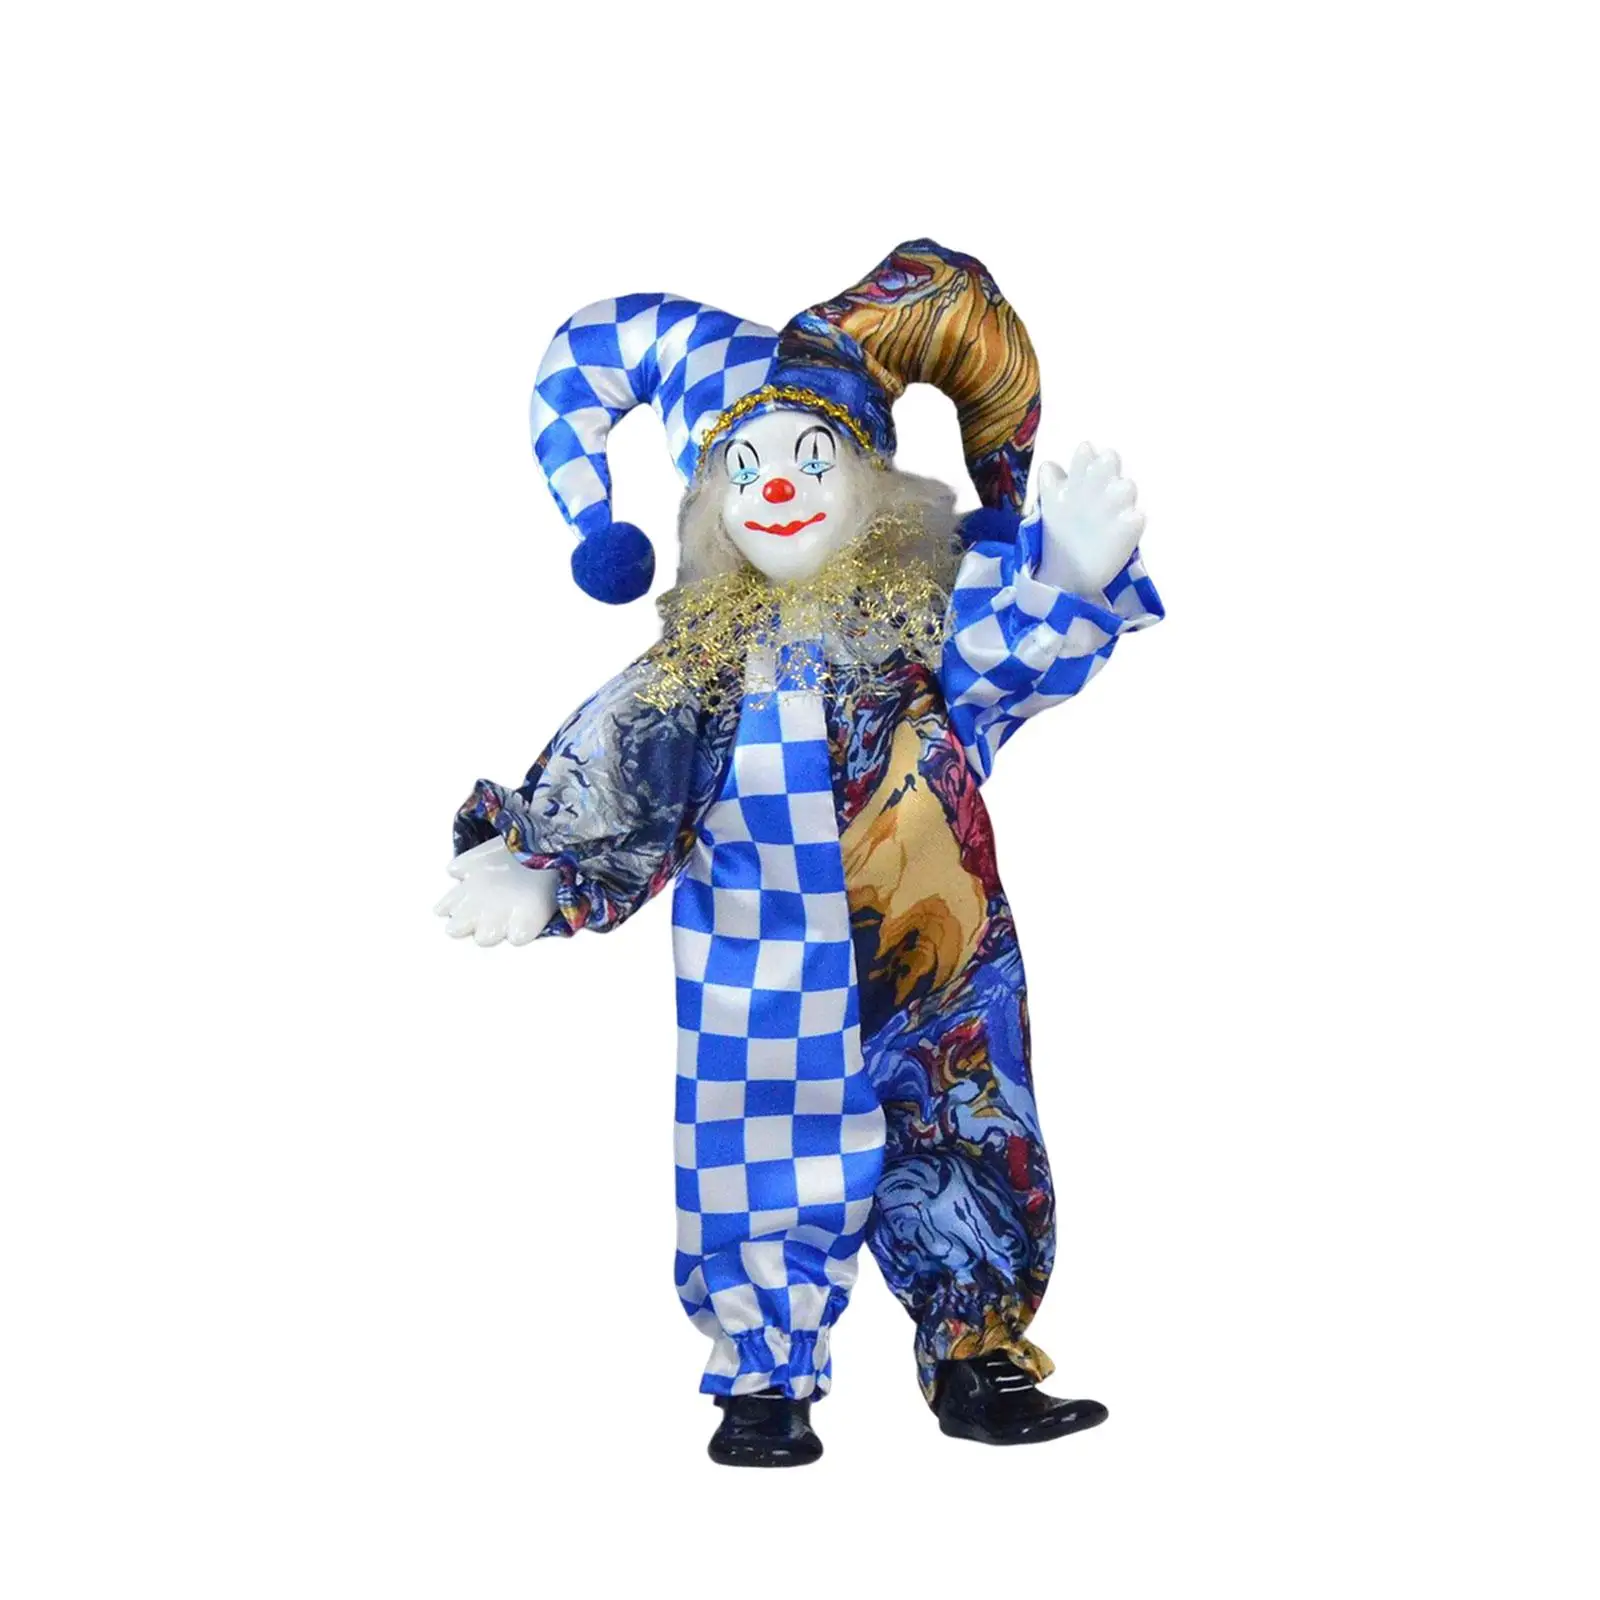 Clown Doll, 24cm in Height, Porcelain Clown Model Delicate Home Decoration Free Standing for Game Prop Valentin Gift